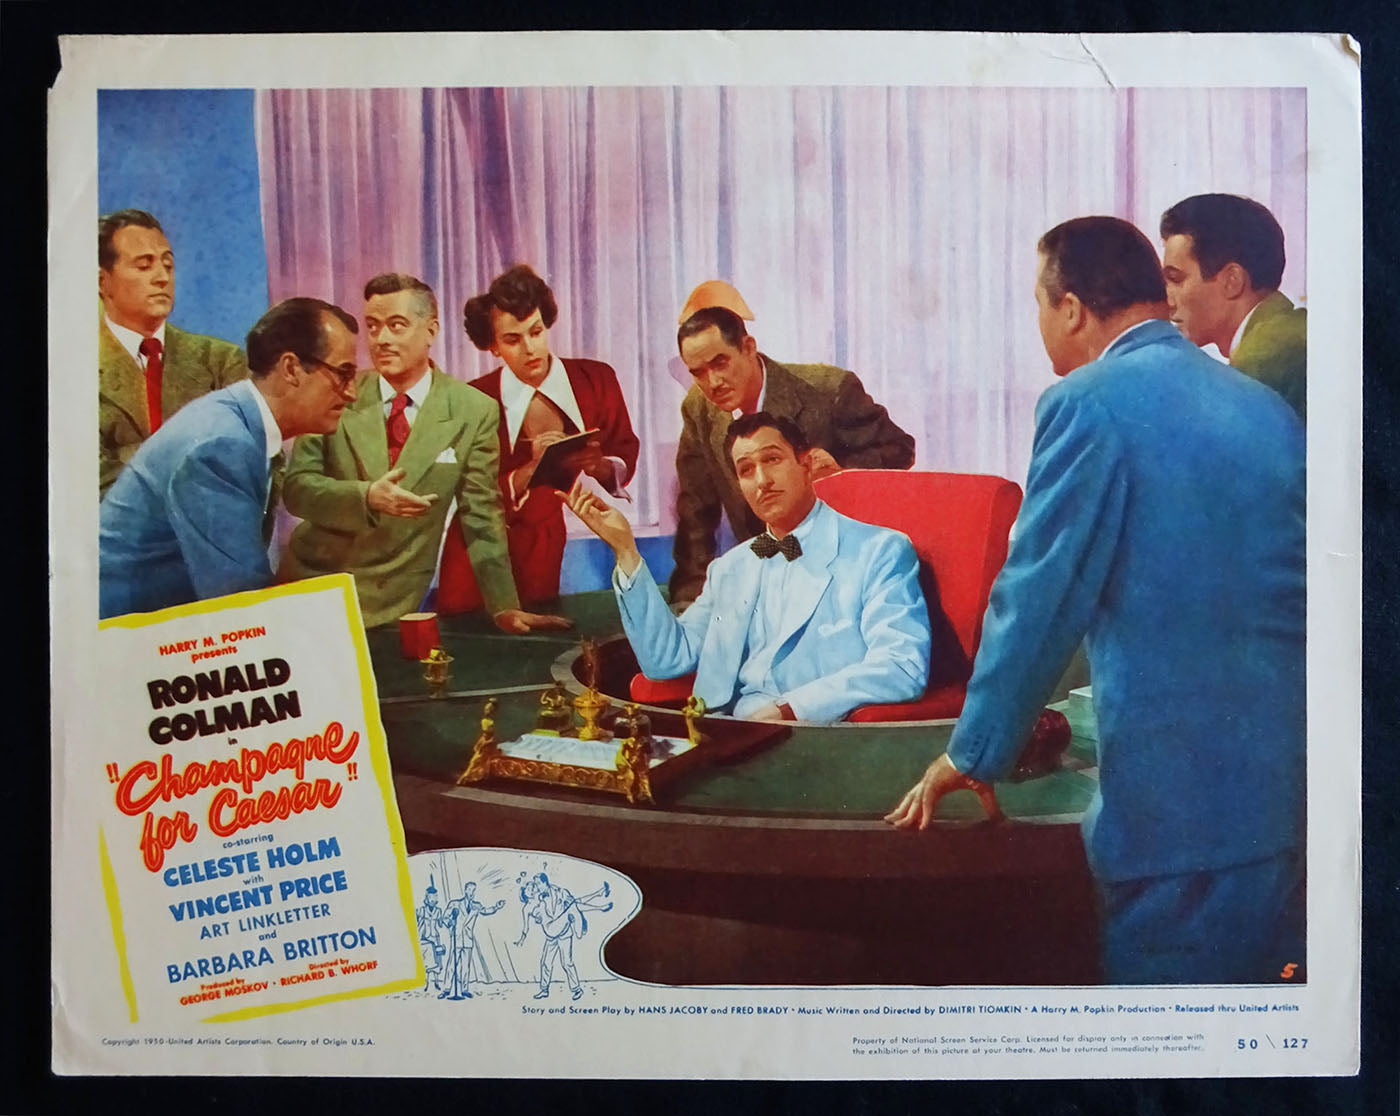 Champagne For Caesar (1950) Lobby Card (Very Fine Condition) Ronald Colman, Celeste Holm, Vincent Price, Art Linkletter